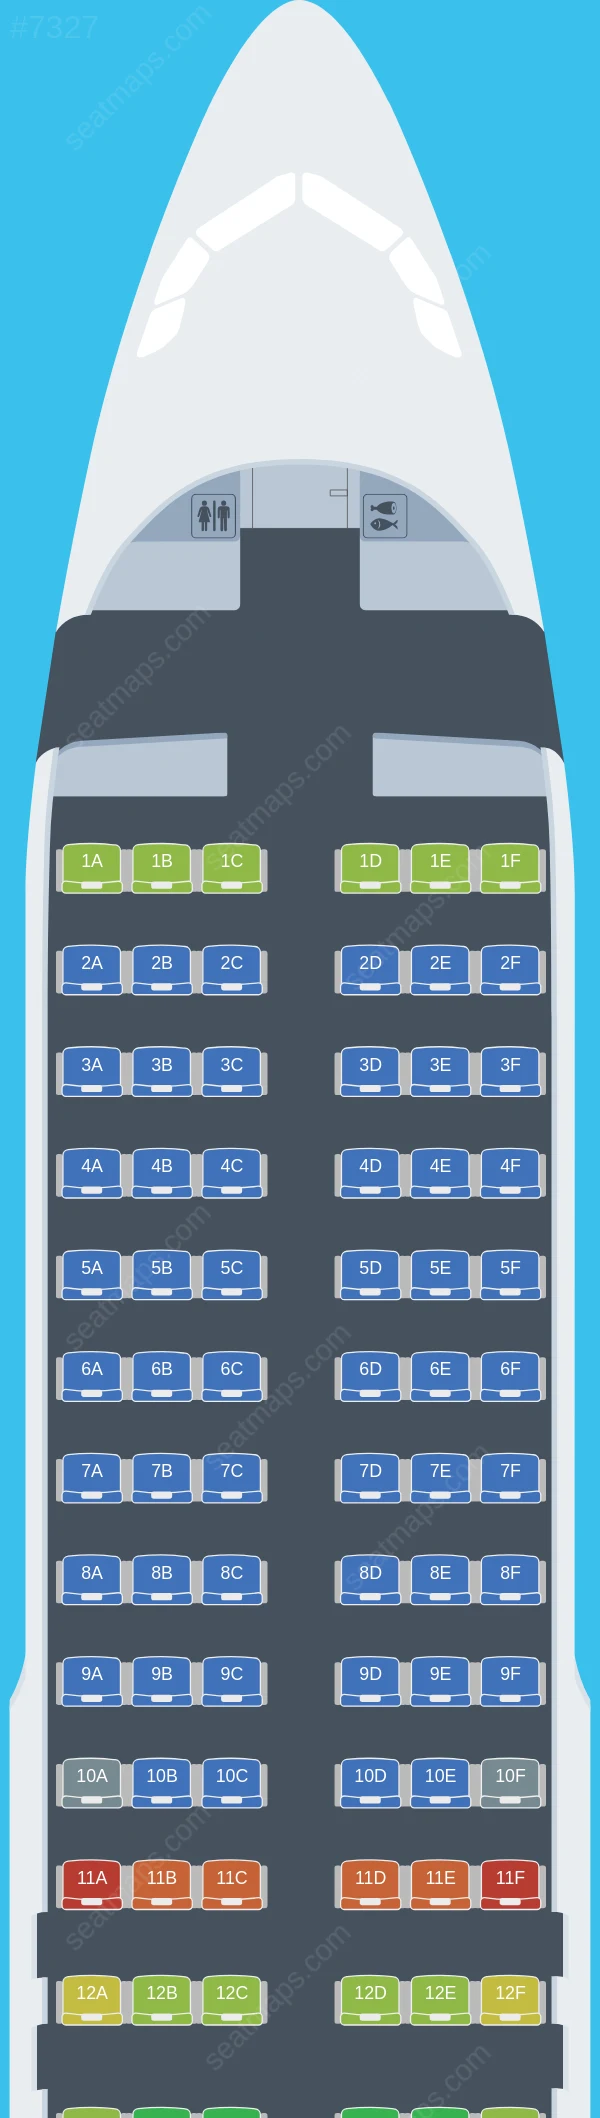 Iberia Airbus A320-200 seatmap preview